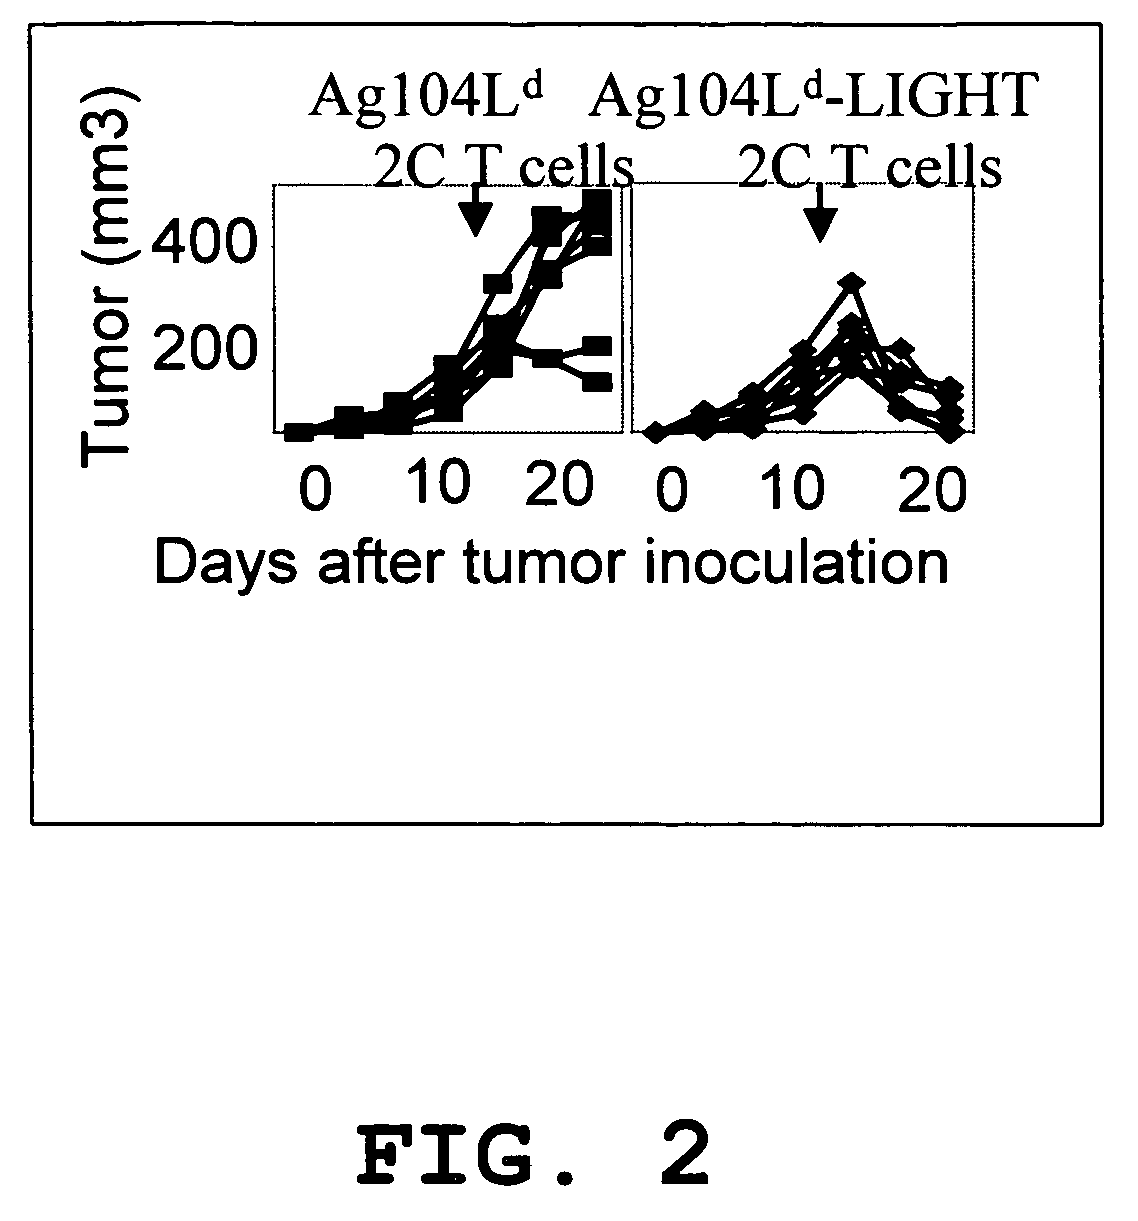 Increased T-cell tumor infiltration by mutant LIGHT